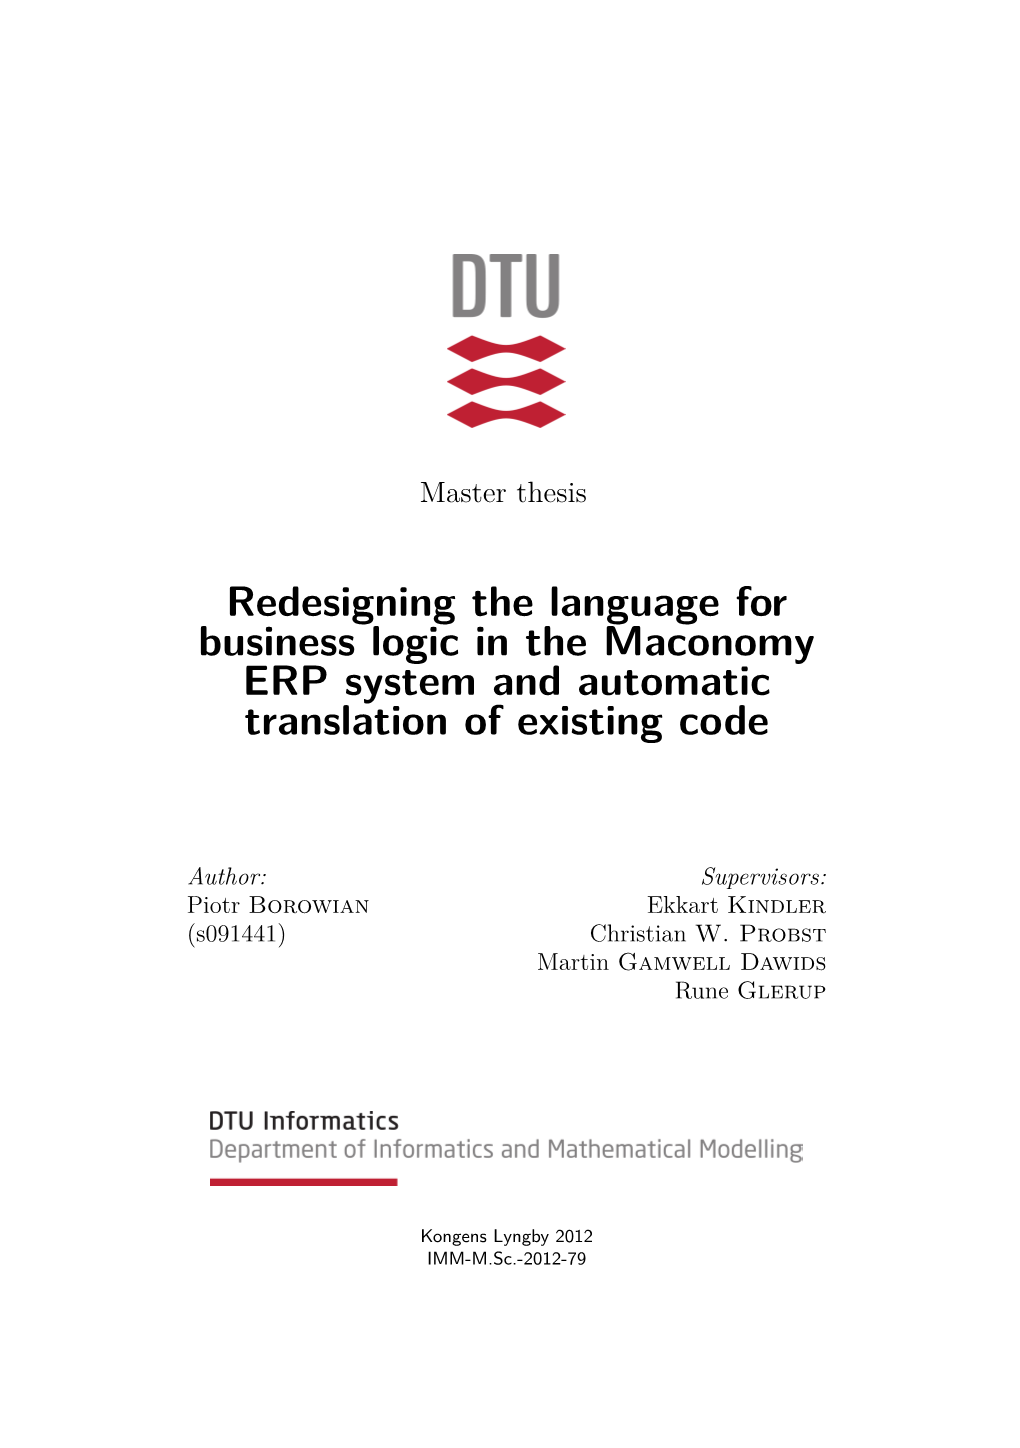 Redesigning the Language for Business Logic in the Maconomy ERP System and Automatic Translation of Existing Code